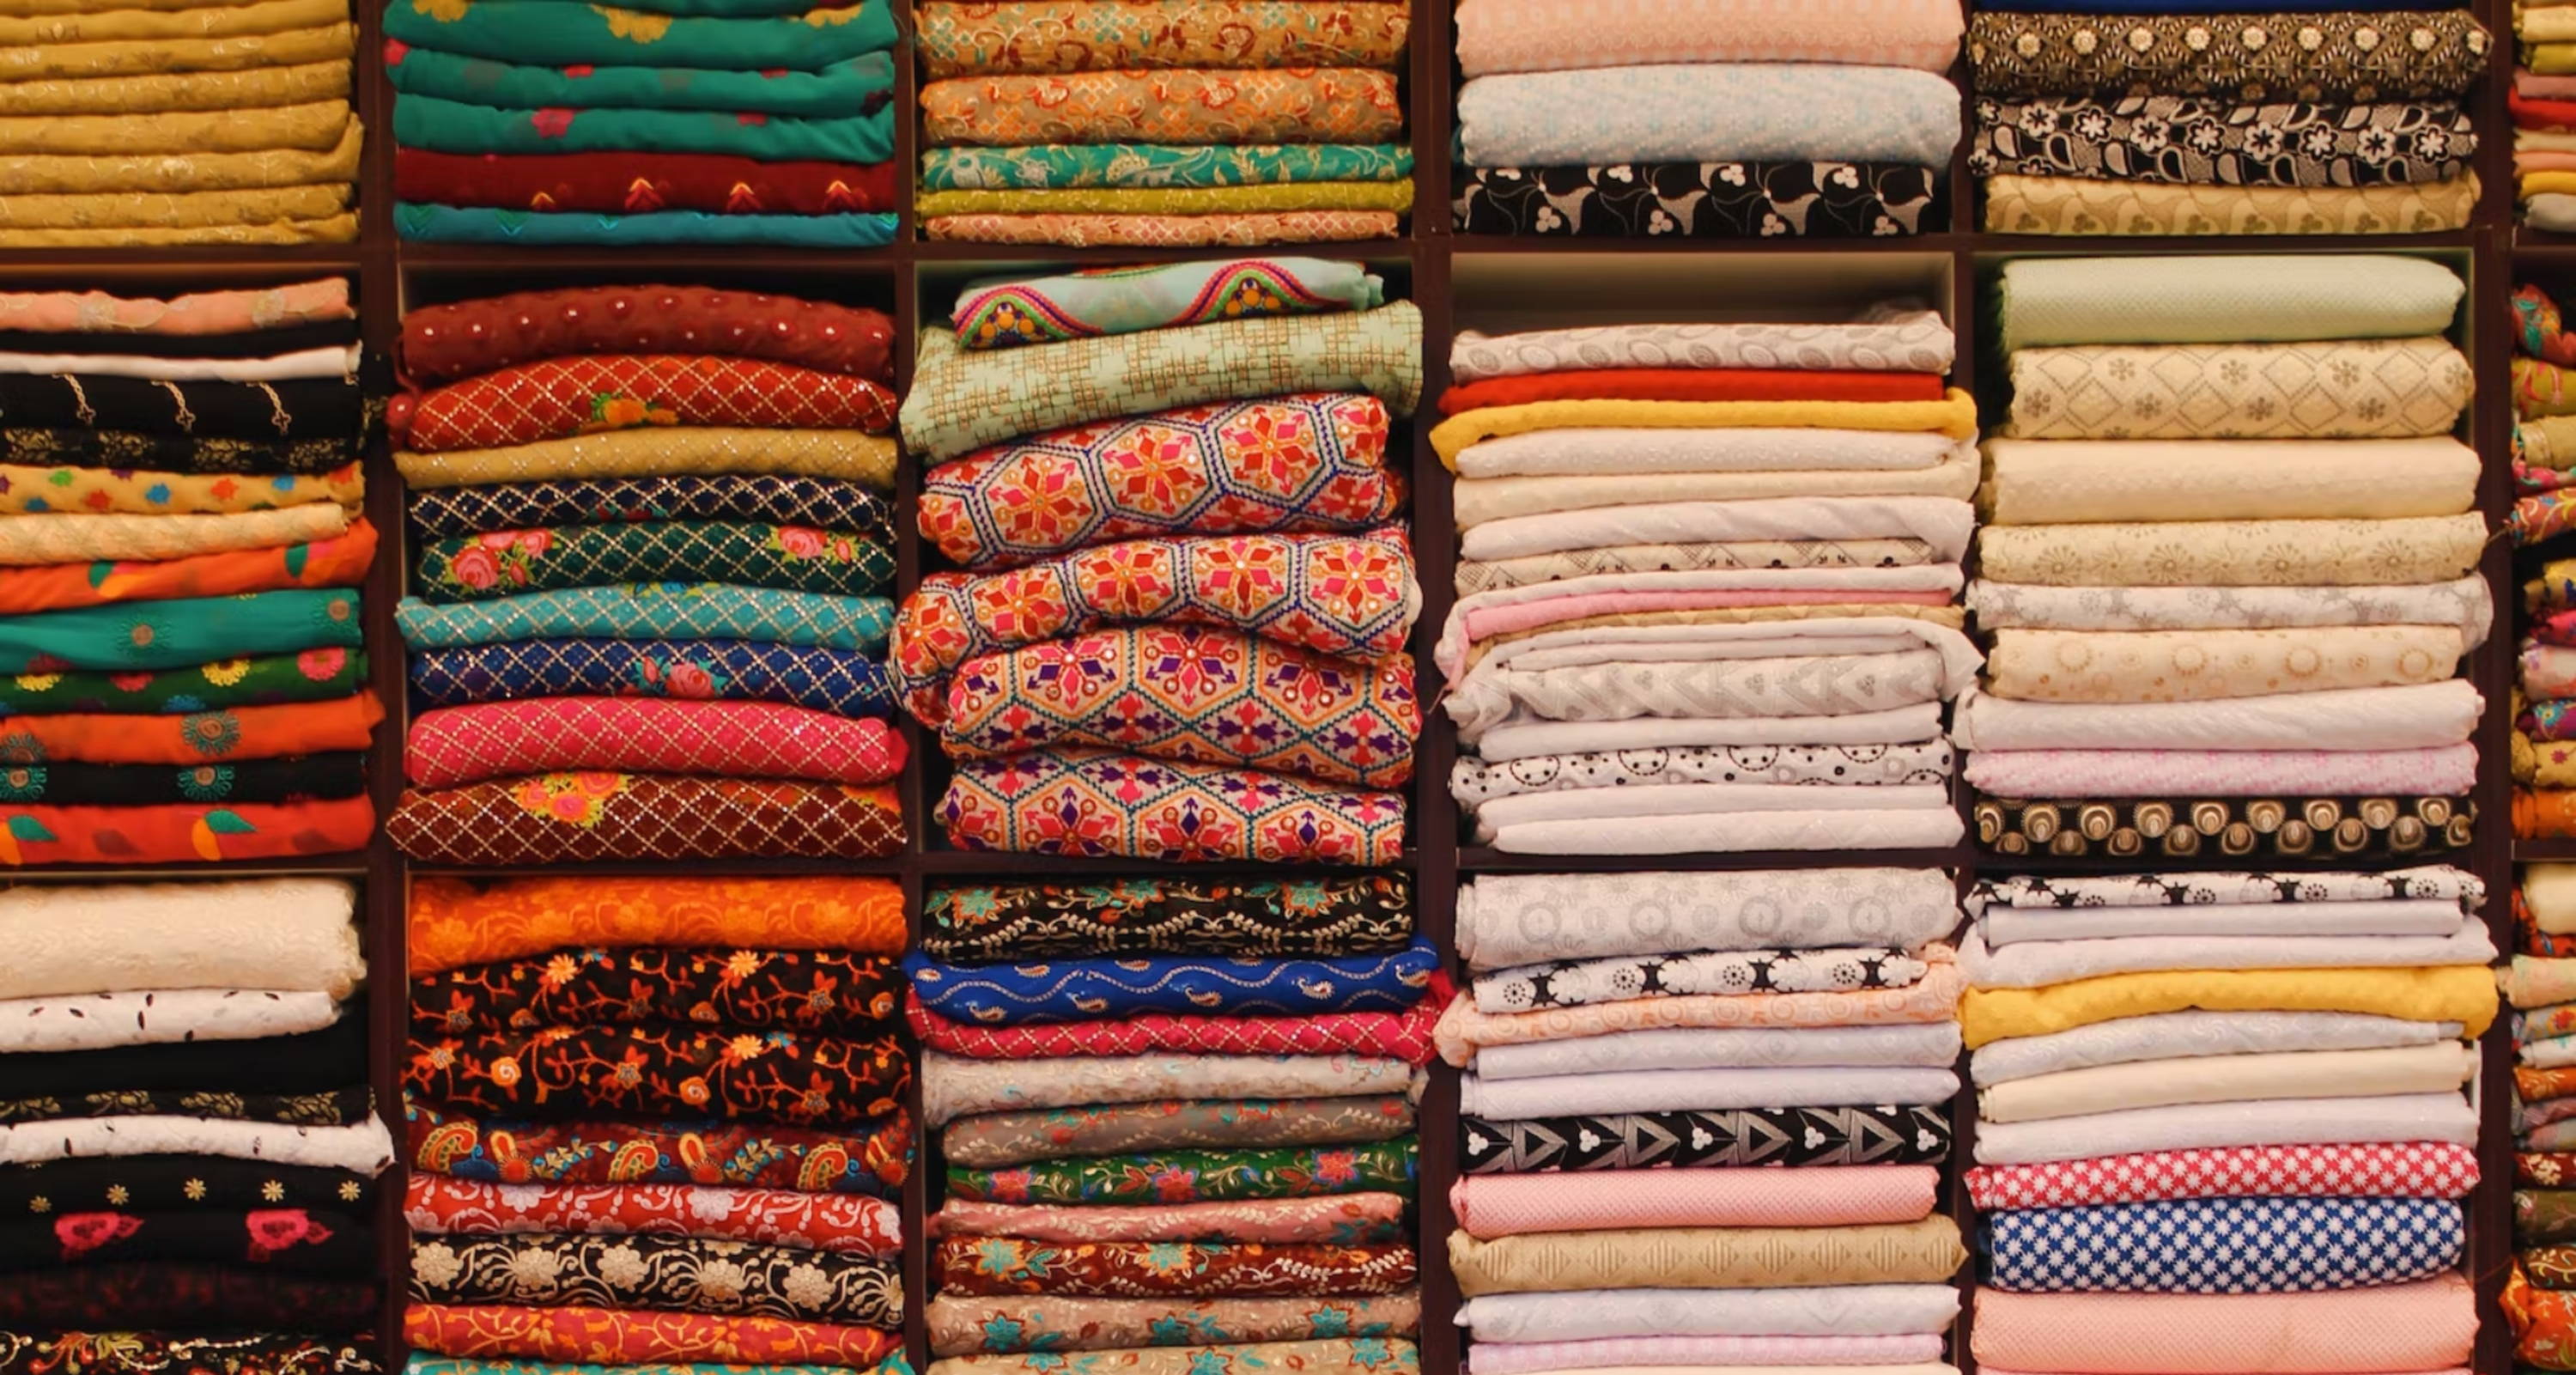 piles of neatly folded, colorful fabrics packed tightly in shelves 